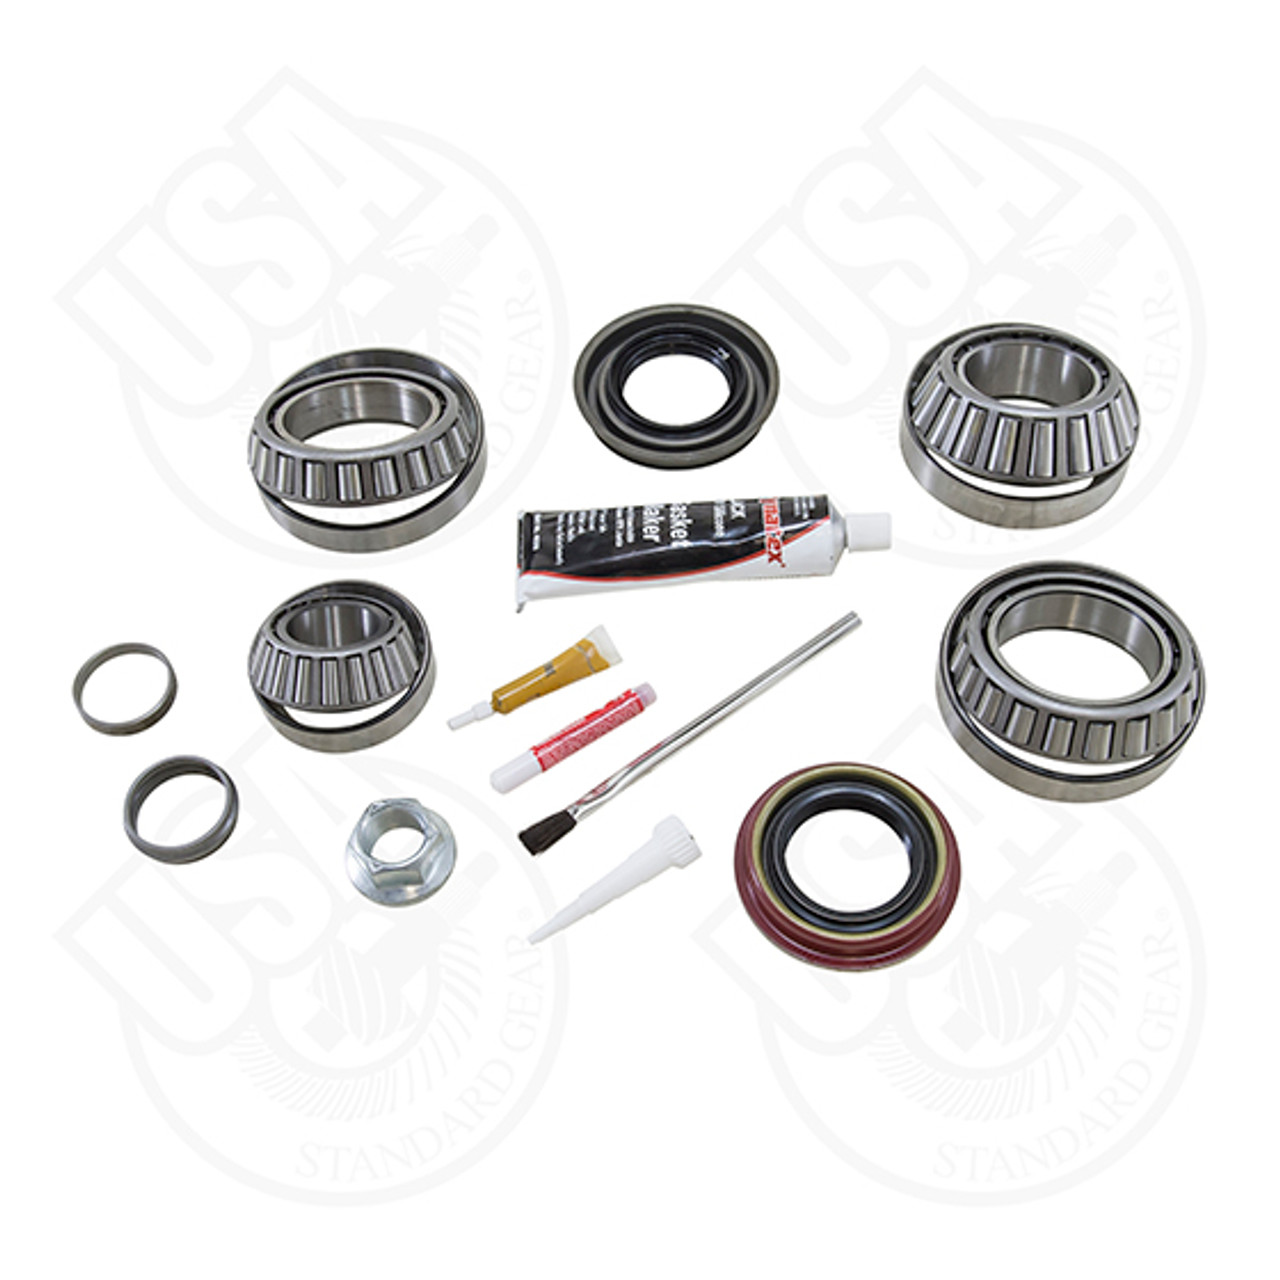 USA Standard Bearing kit for '08-'10 Ford 10.5" with aftermarket ring & pinion set